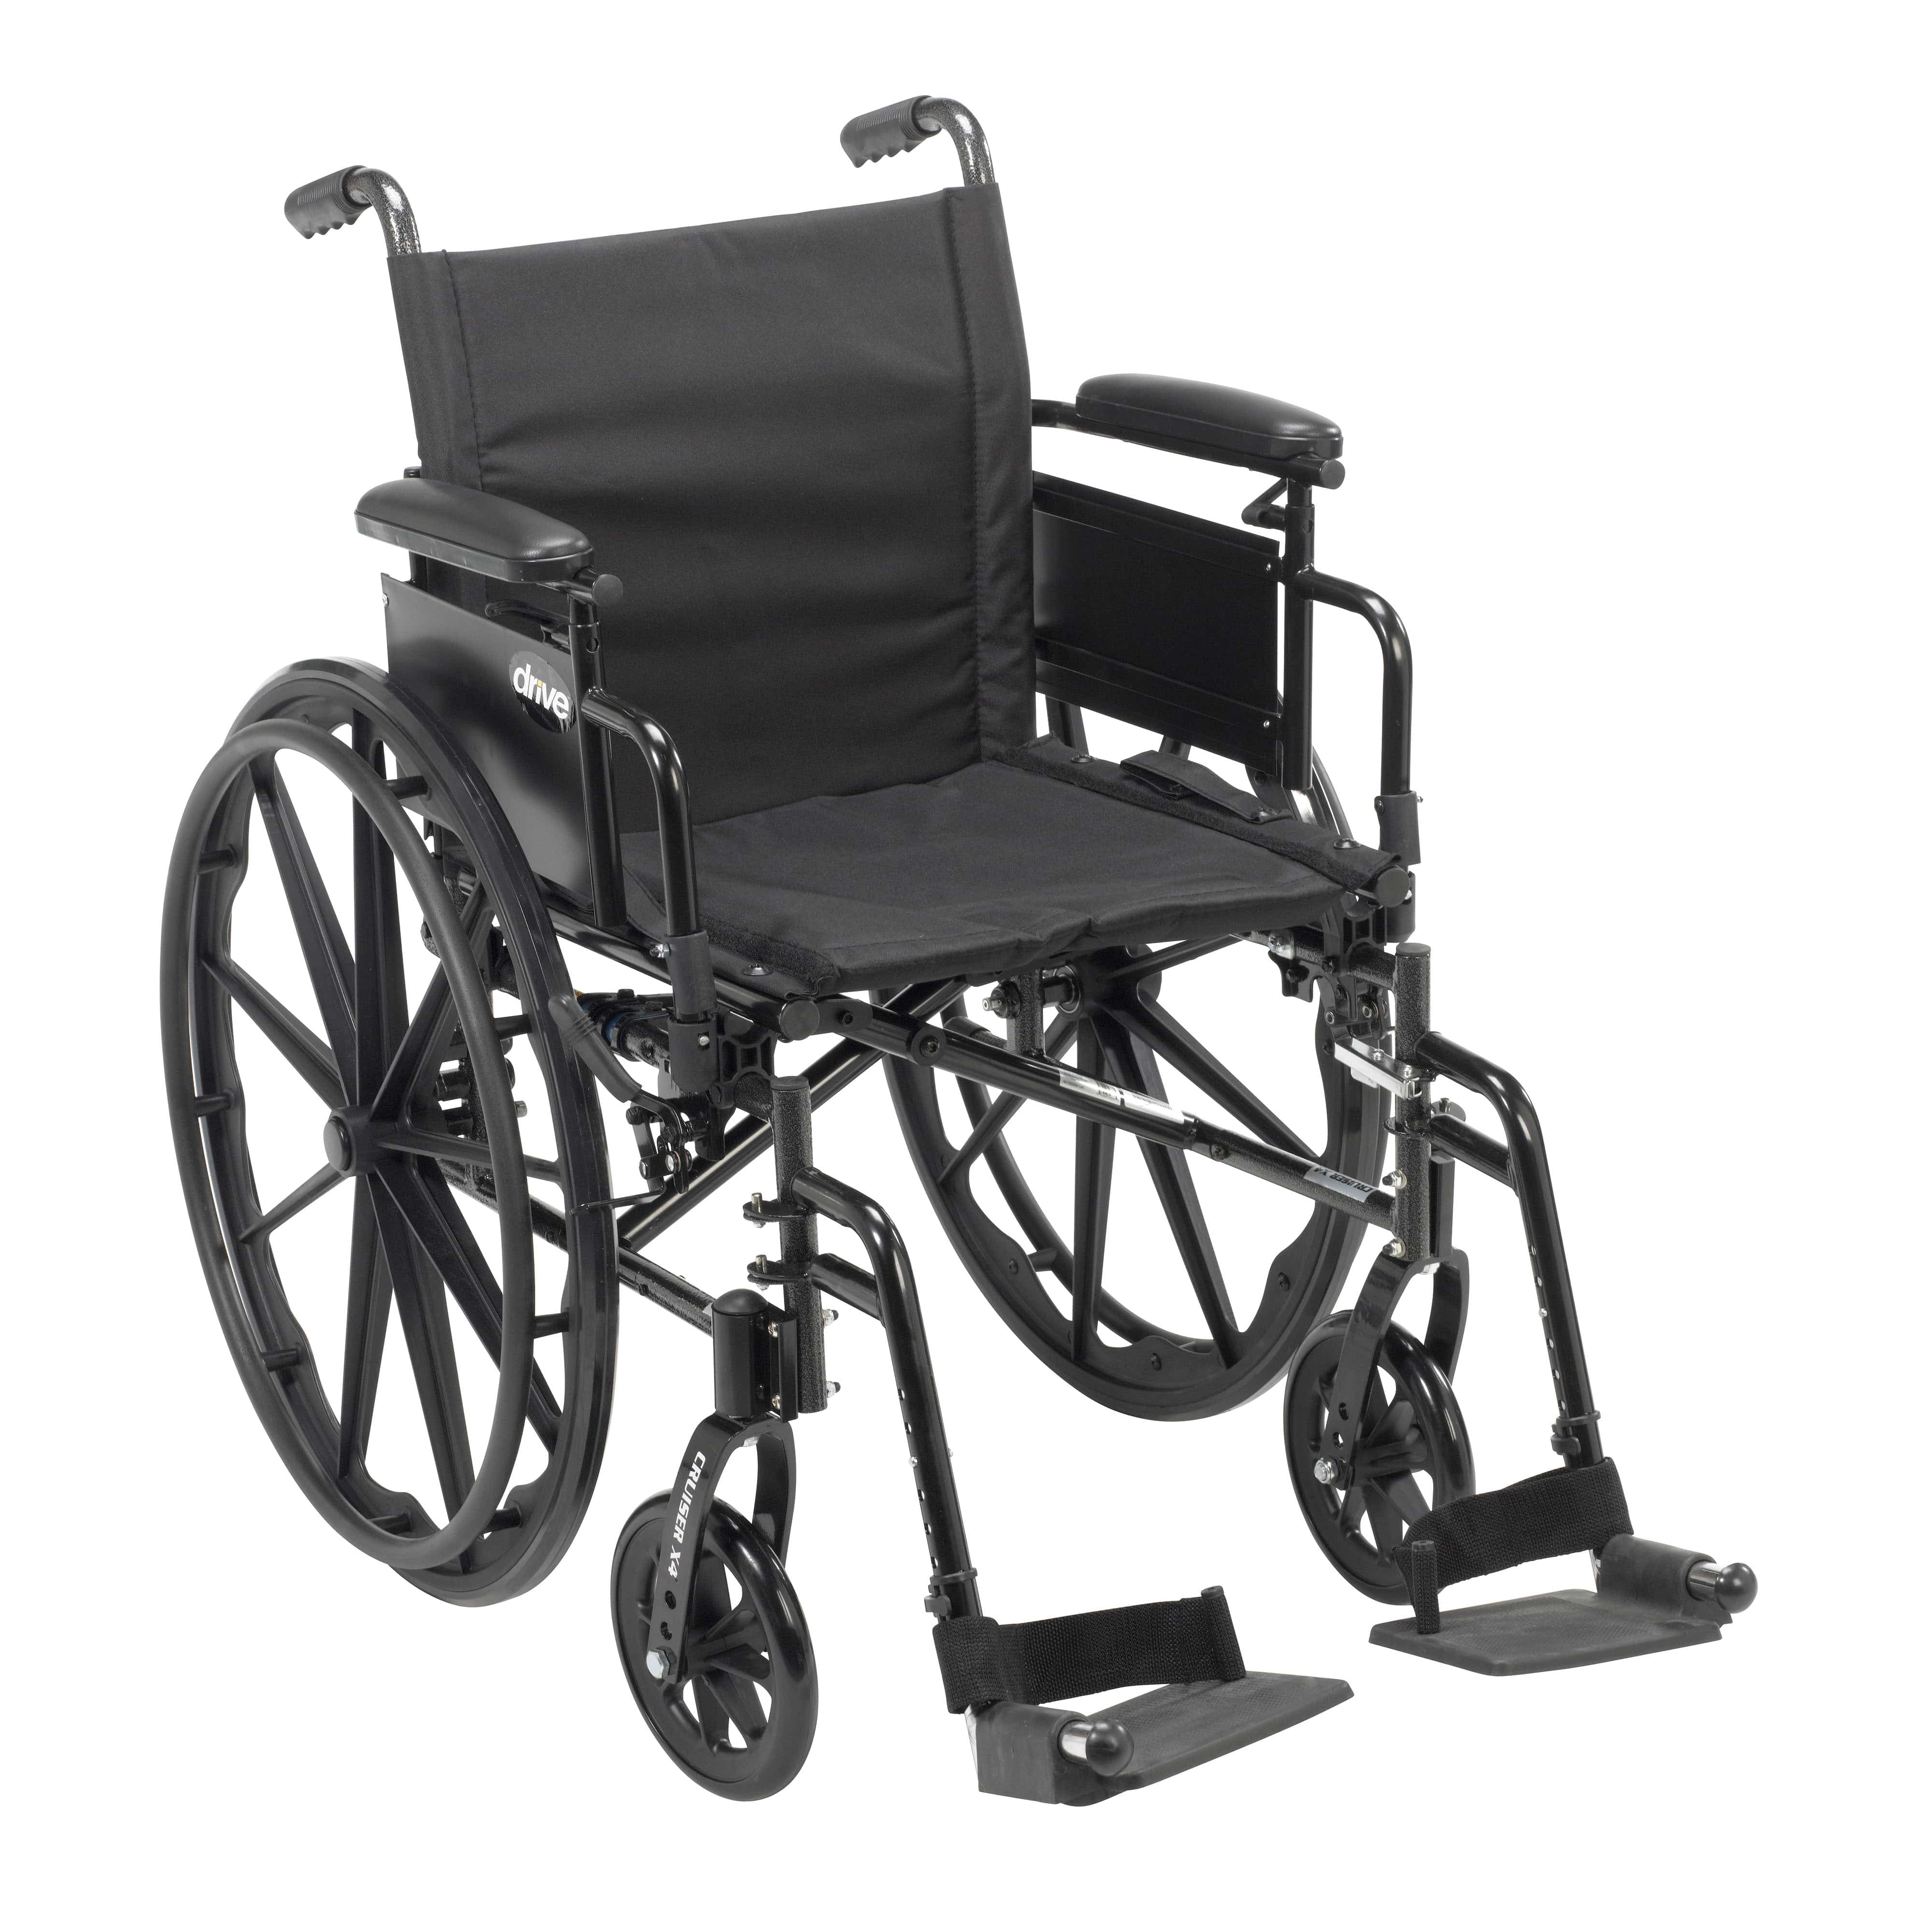 Drive Medical Wheelchairs/Lightweight Wheelchairs Desk Arms / Swing Away Footrests / 16" Seat Drive Medical Cruiser X4 Lightweight Dual Axle Wheelchair with Adjustable Detatchable Arms